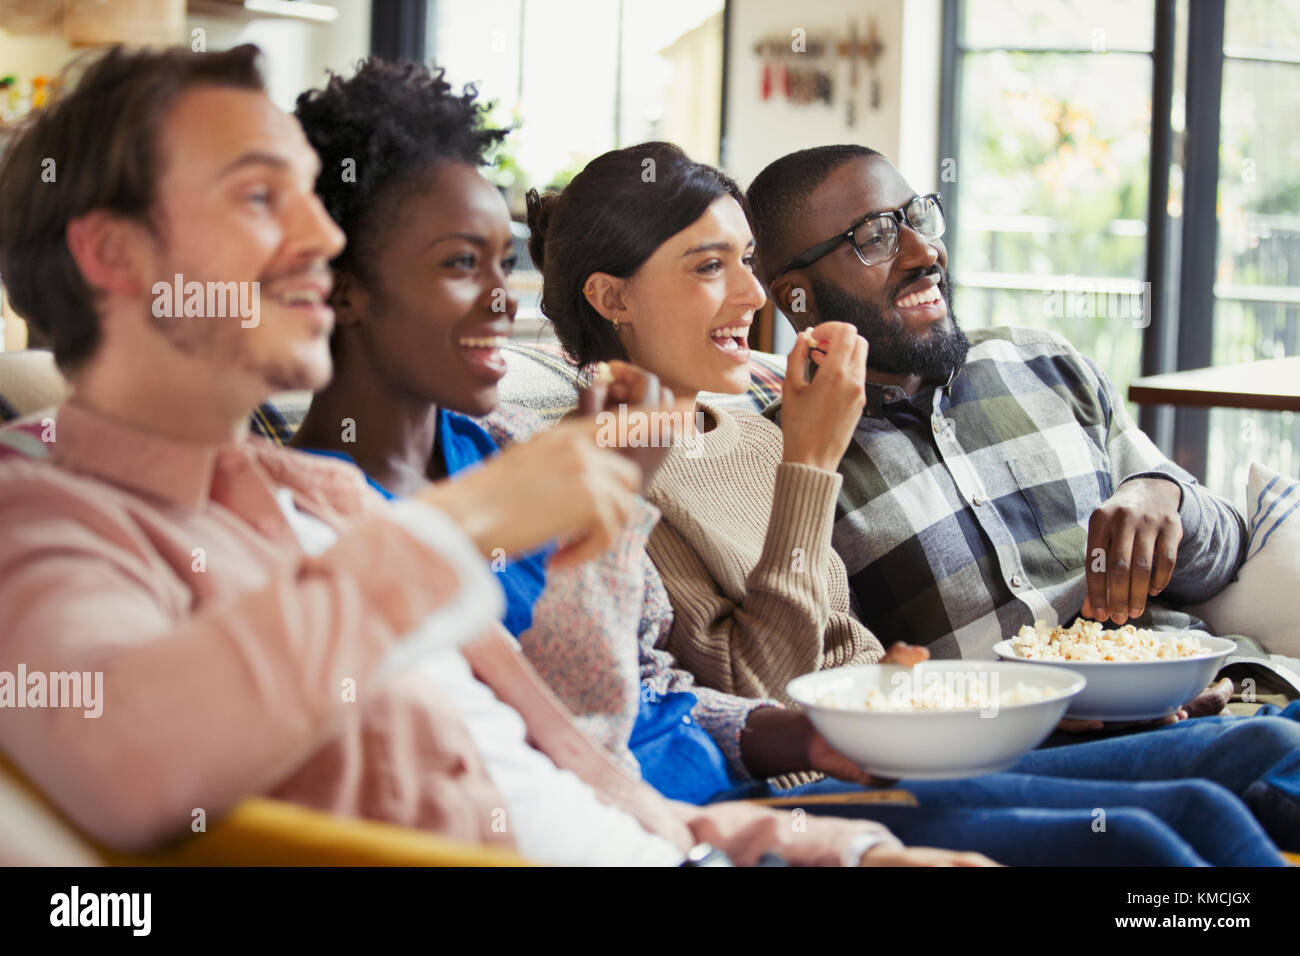 Smiling couples watching movie, eating popcorn Stock Photo